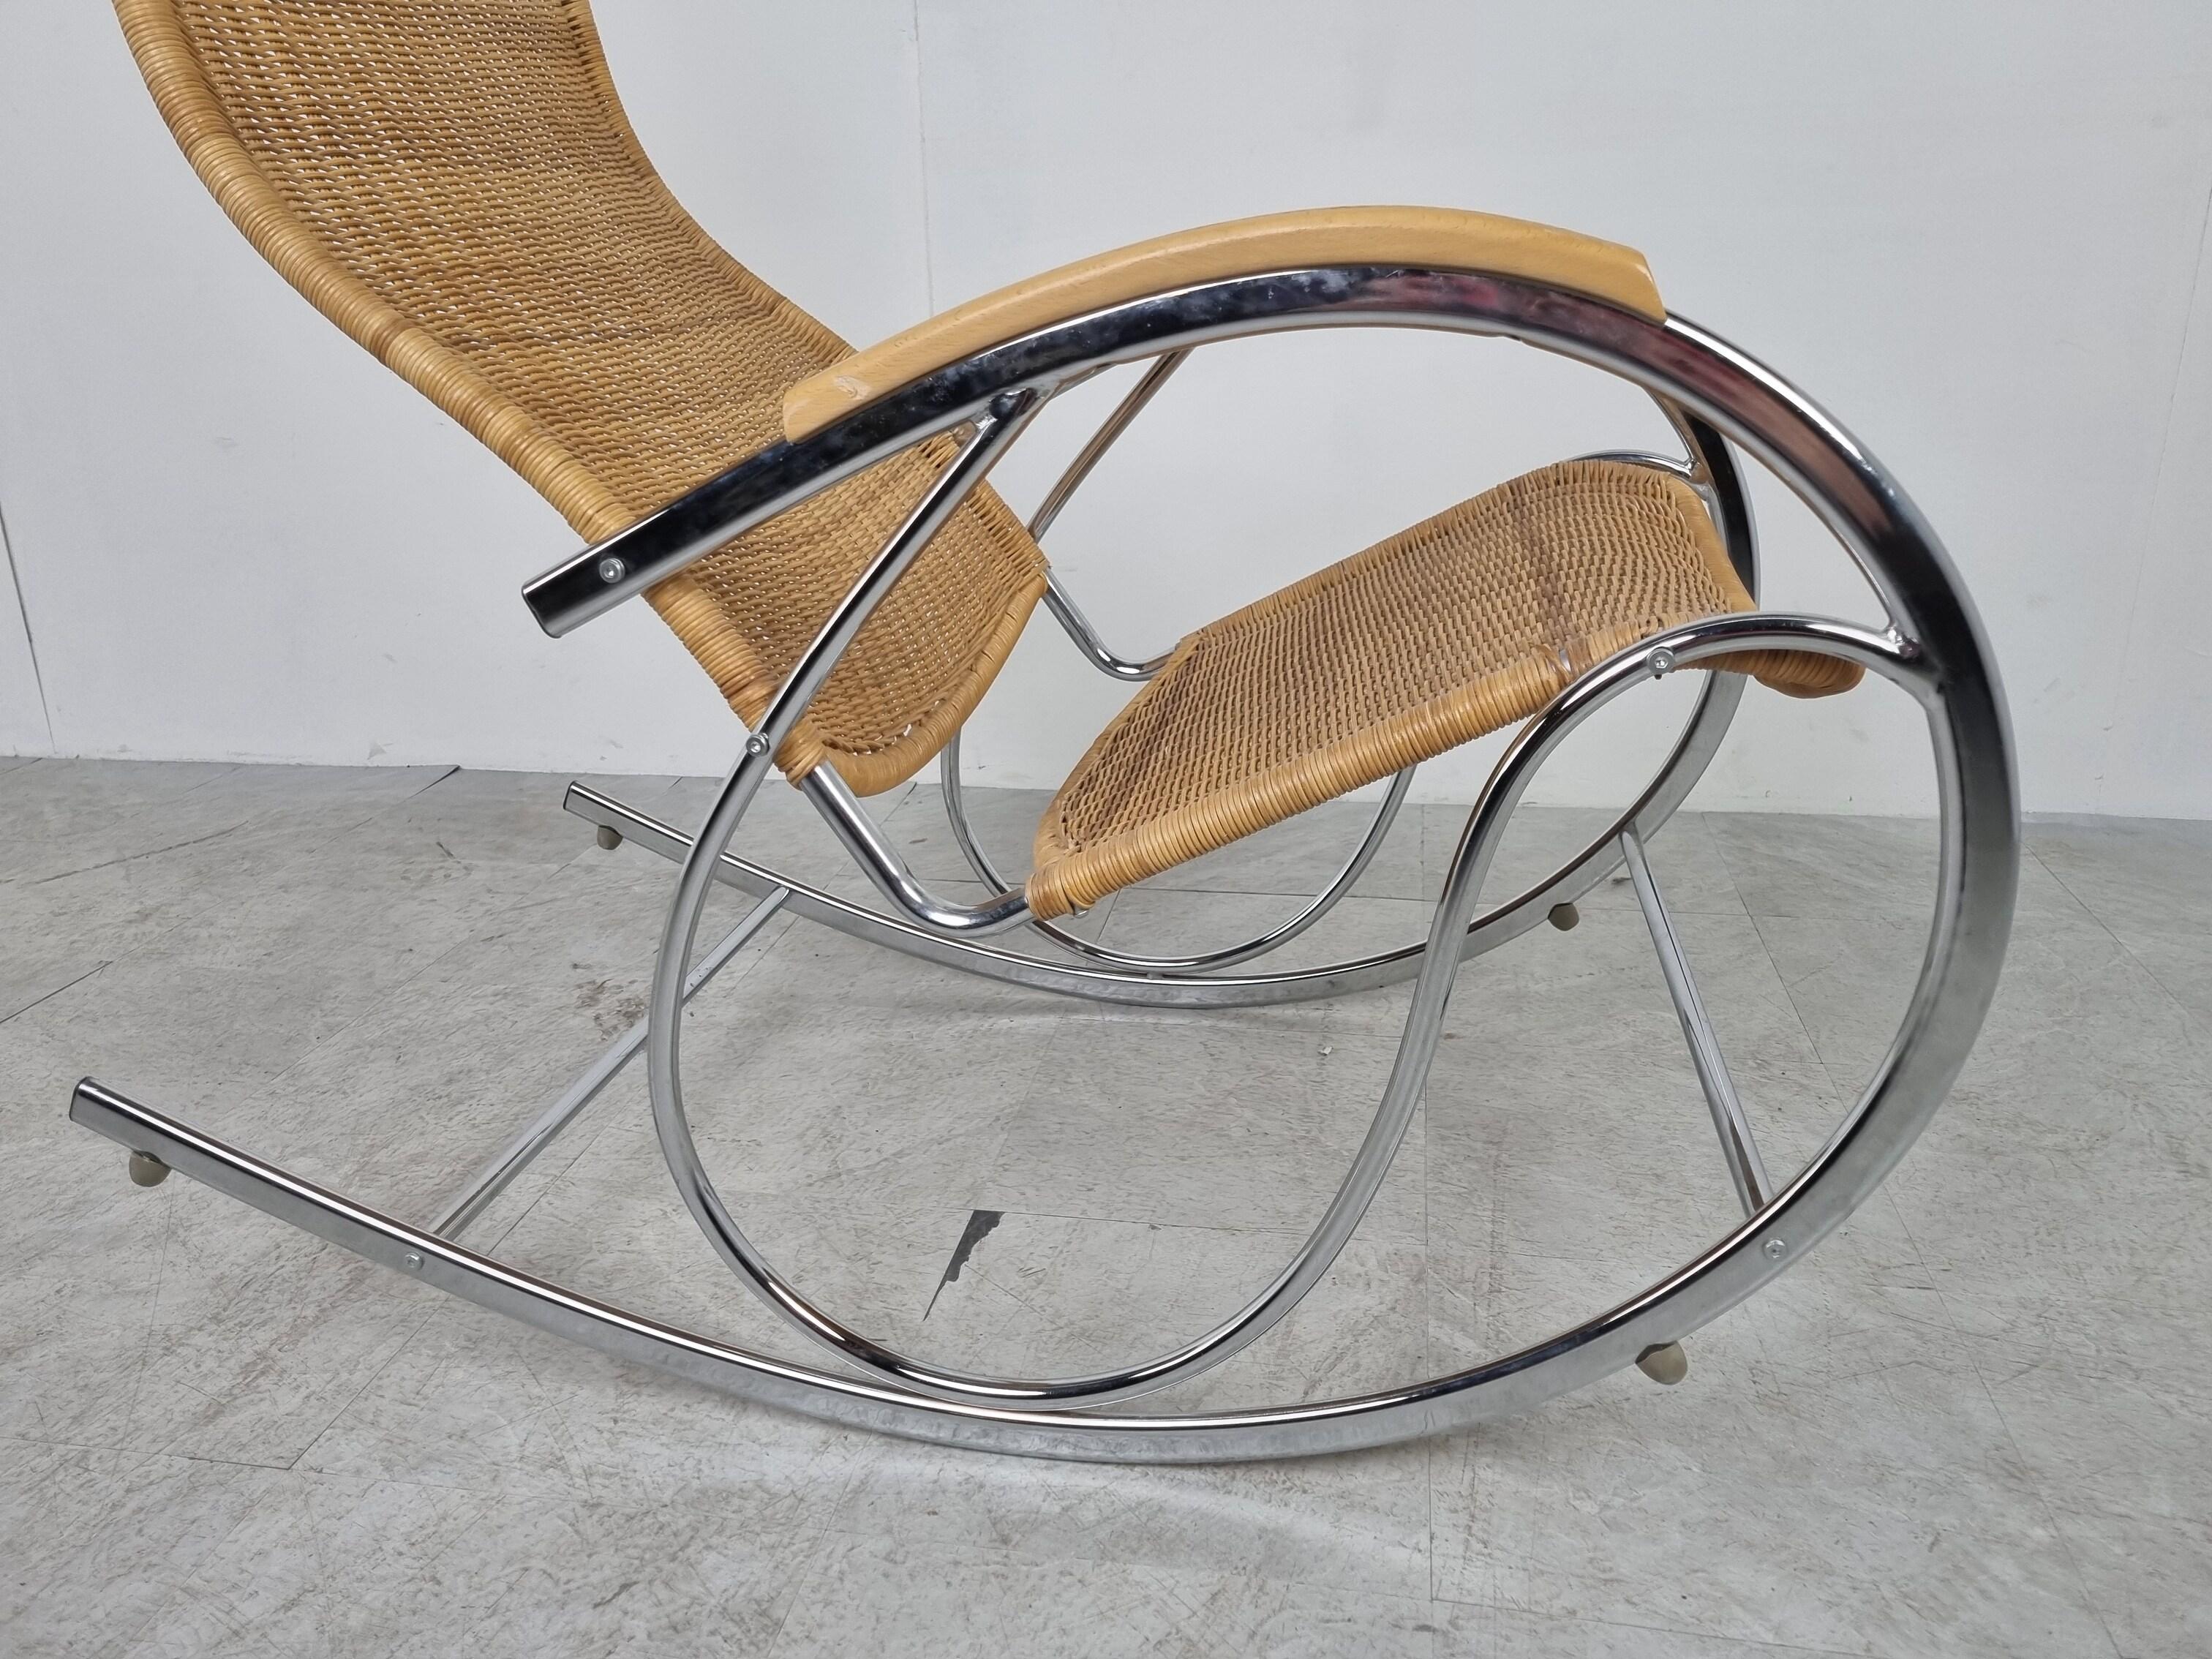 Vintage Chrome and Wicker Rocking Chair, 1970s For Sale 5